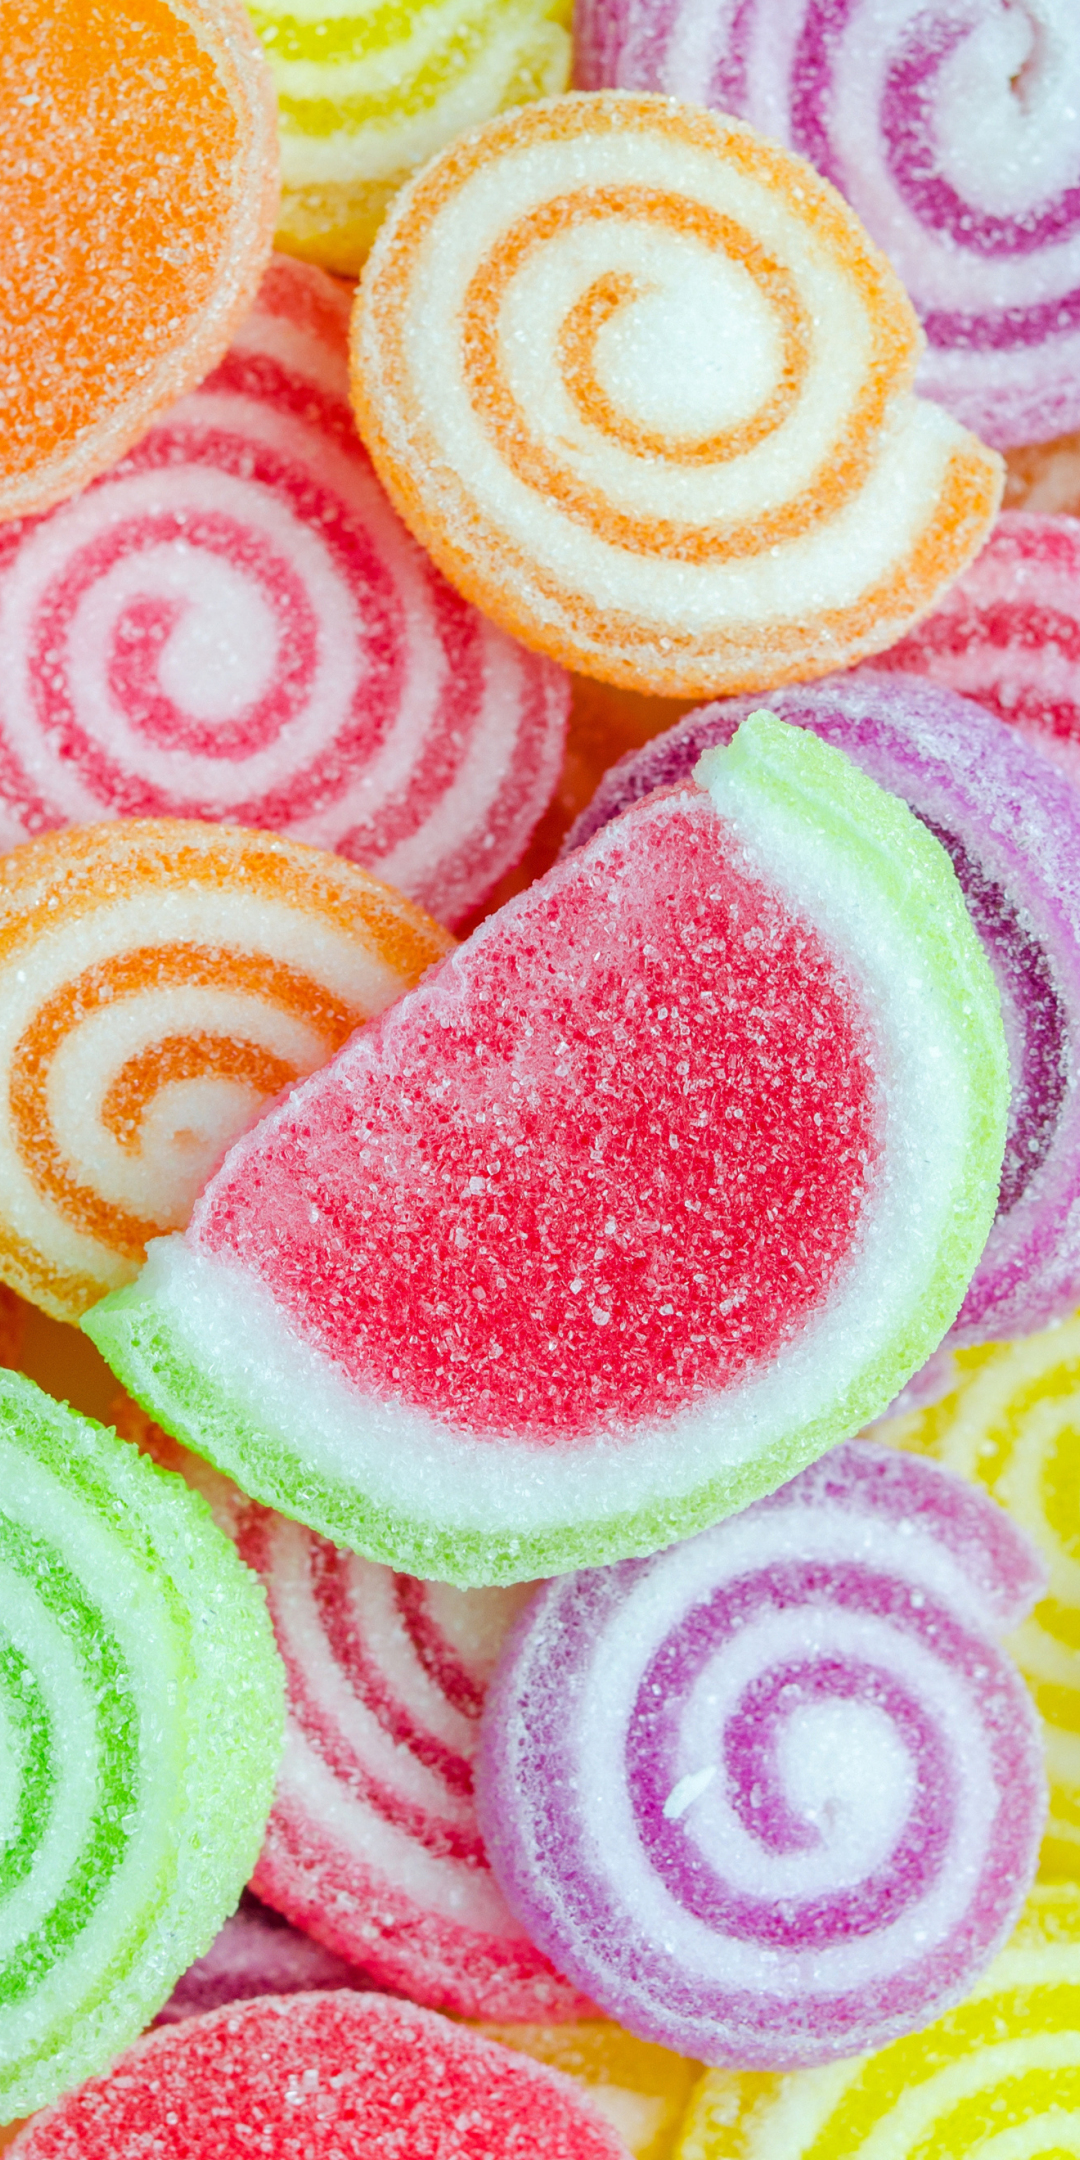 Sweet candies, colorful, 1080x2160 wallpaper